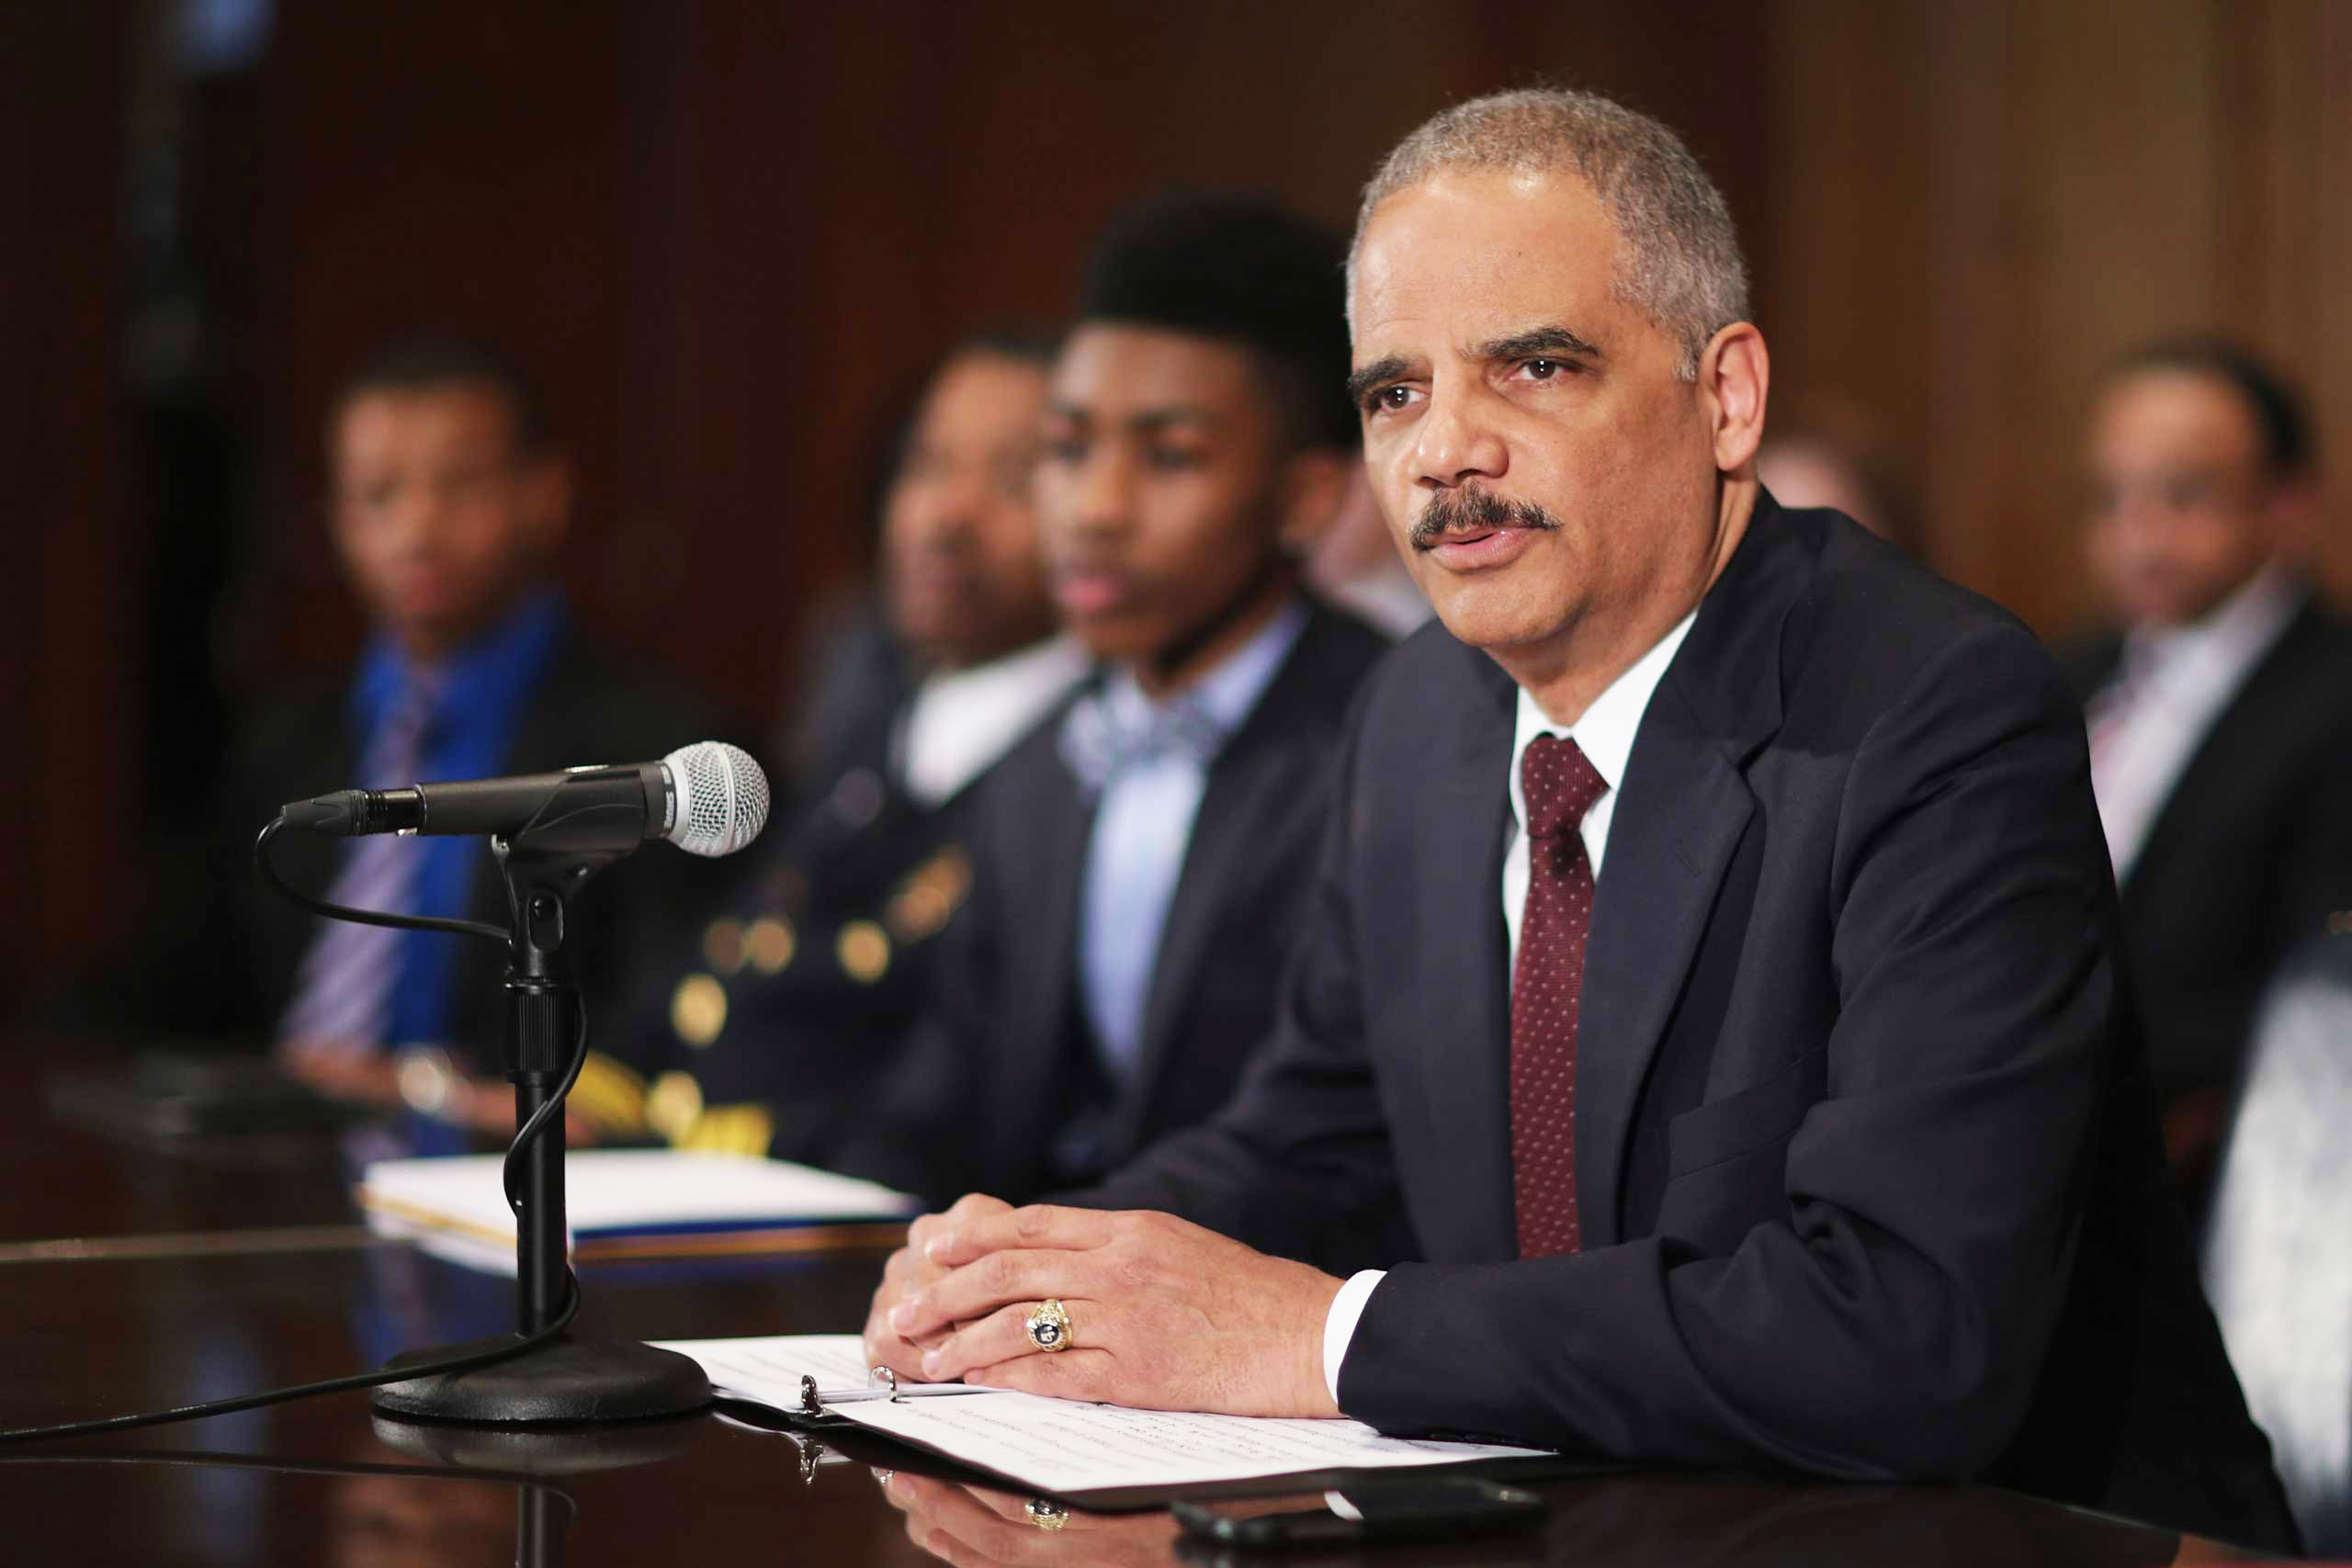 U.S. Attorney General Eric Holder delivers remarks about the shooting of two police officers in Ferguson, Mo., while announcing the first six pilot sites for the National Initiative for Building Community Trust and Justice at the Department of Justice in Washington, D.C., on March 12, 2015 (Chip Somodevilla&mdash;Getty Images)